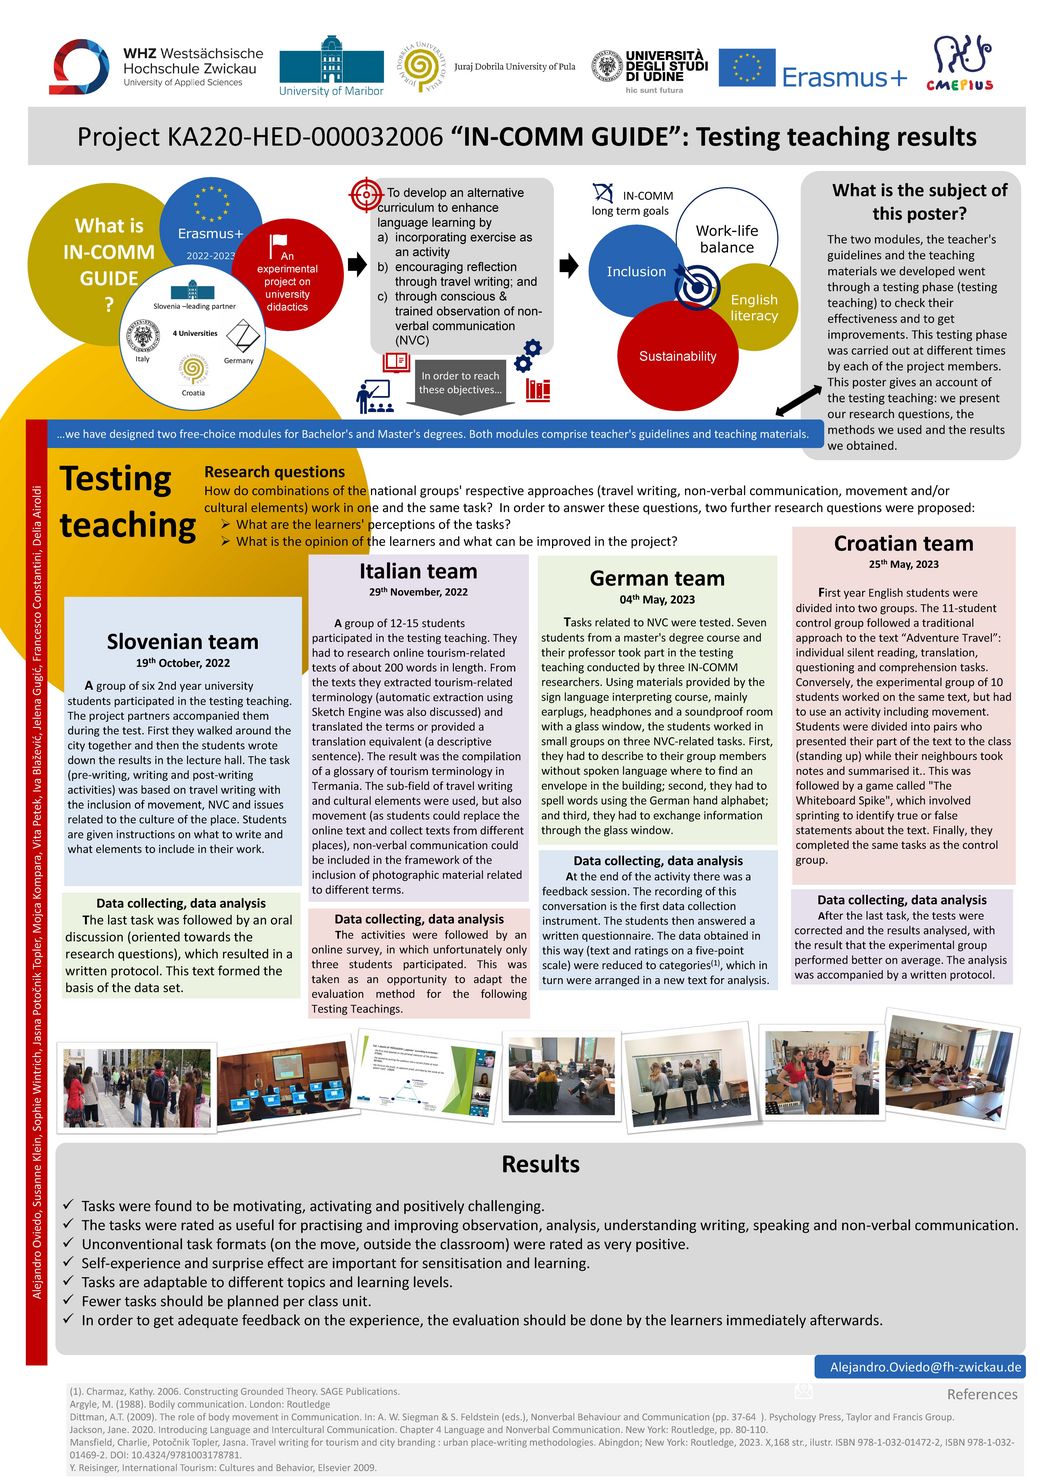 Abbildung: Poster Projekt "IN-COMM Guide": Testing teaching results